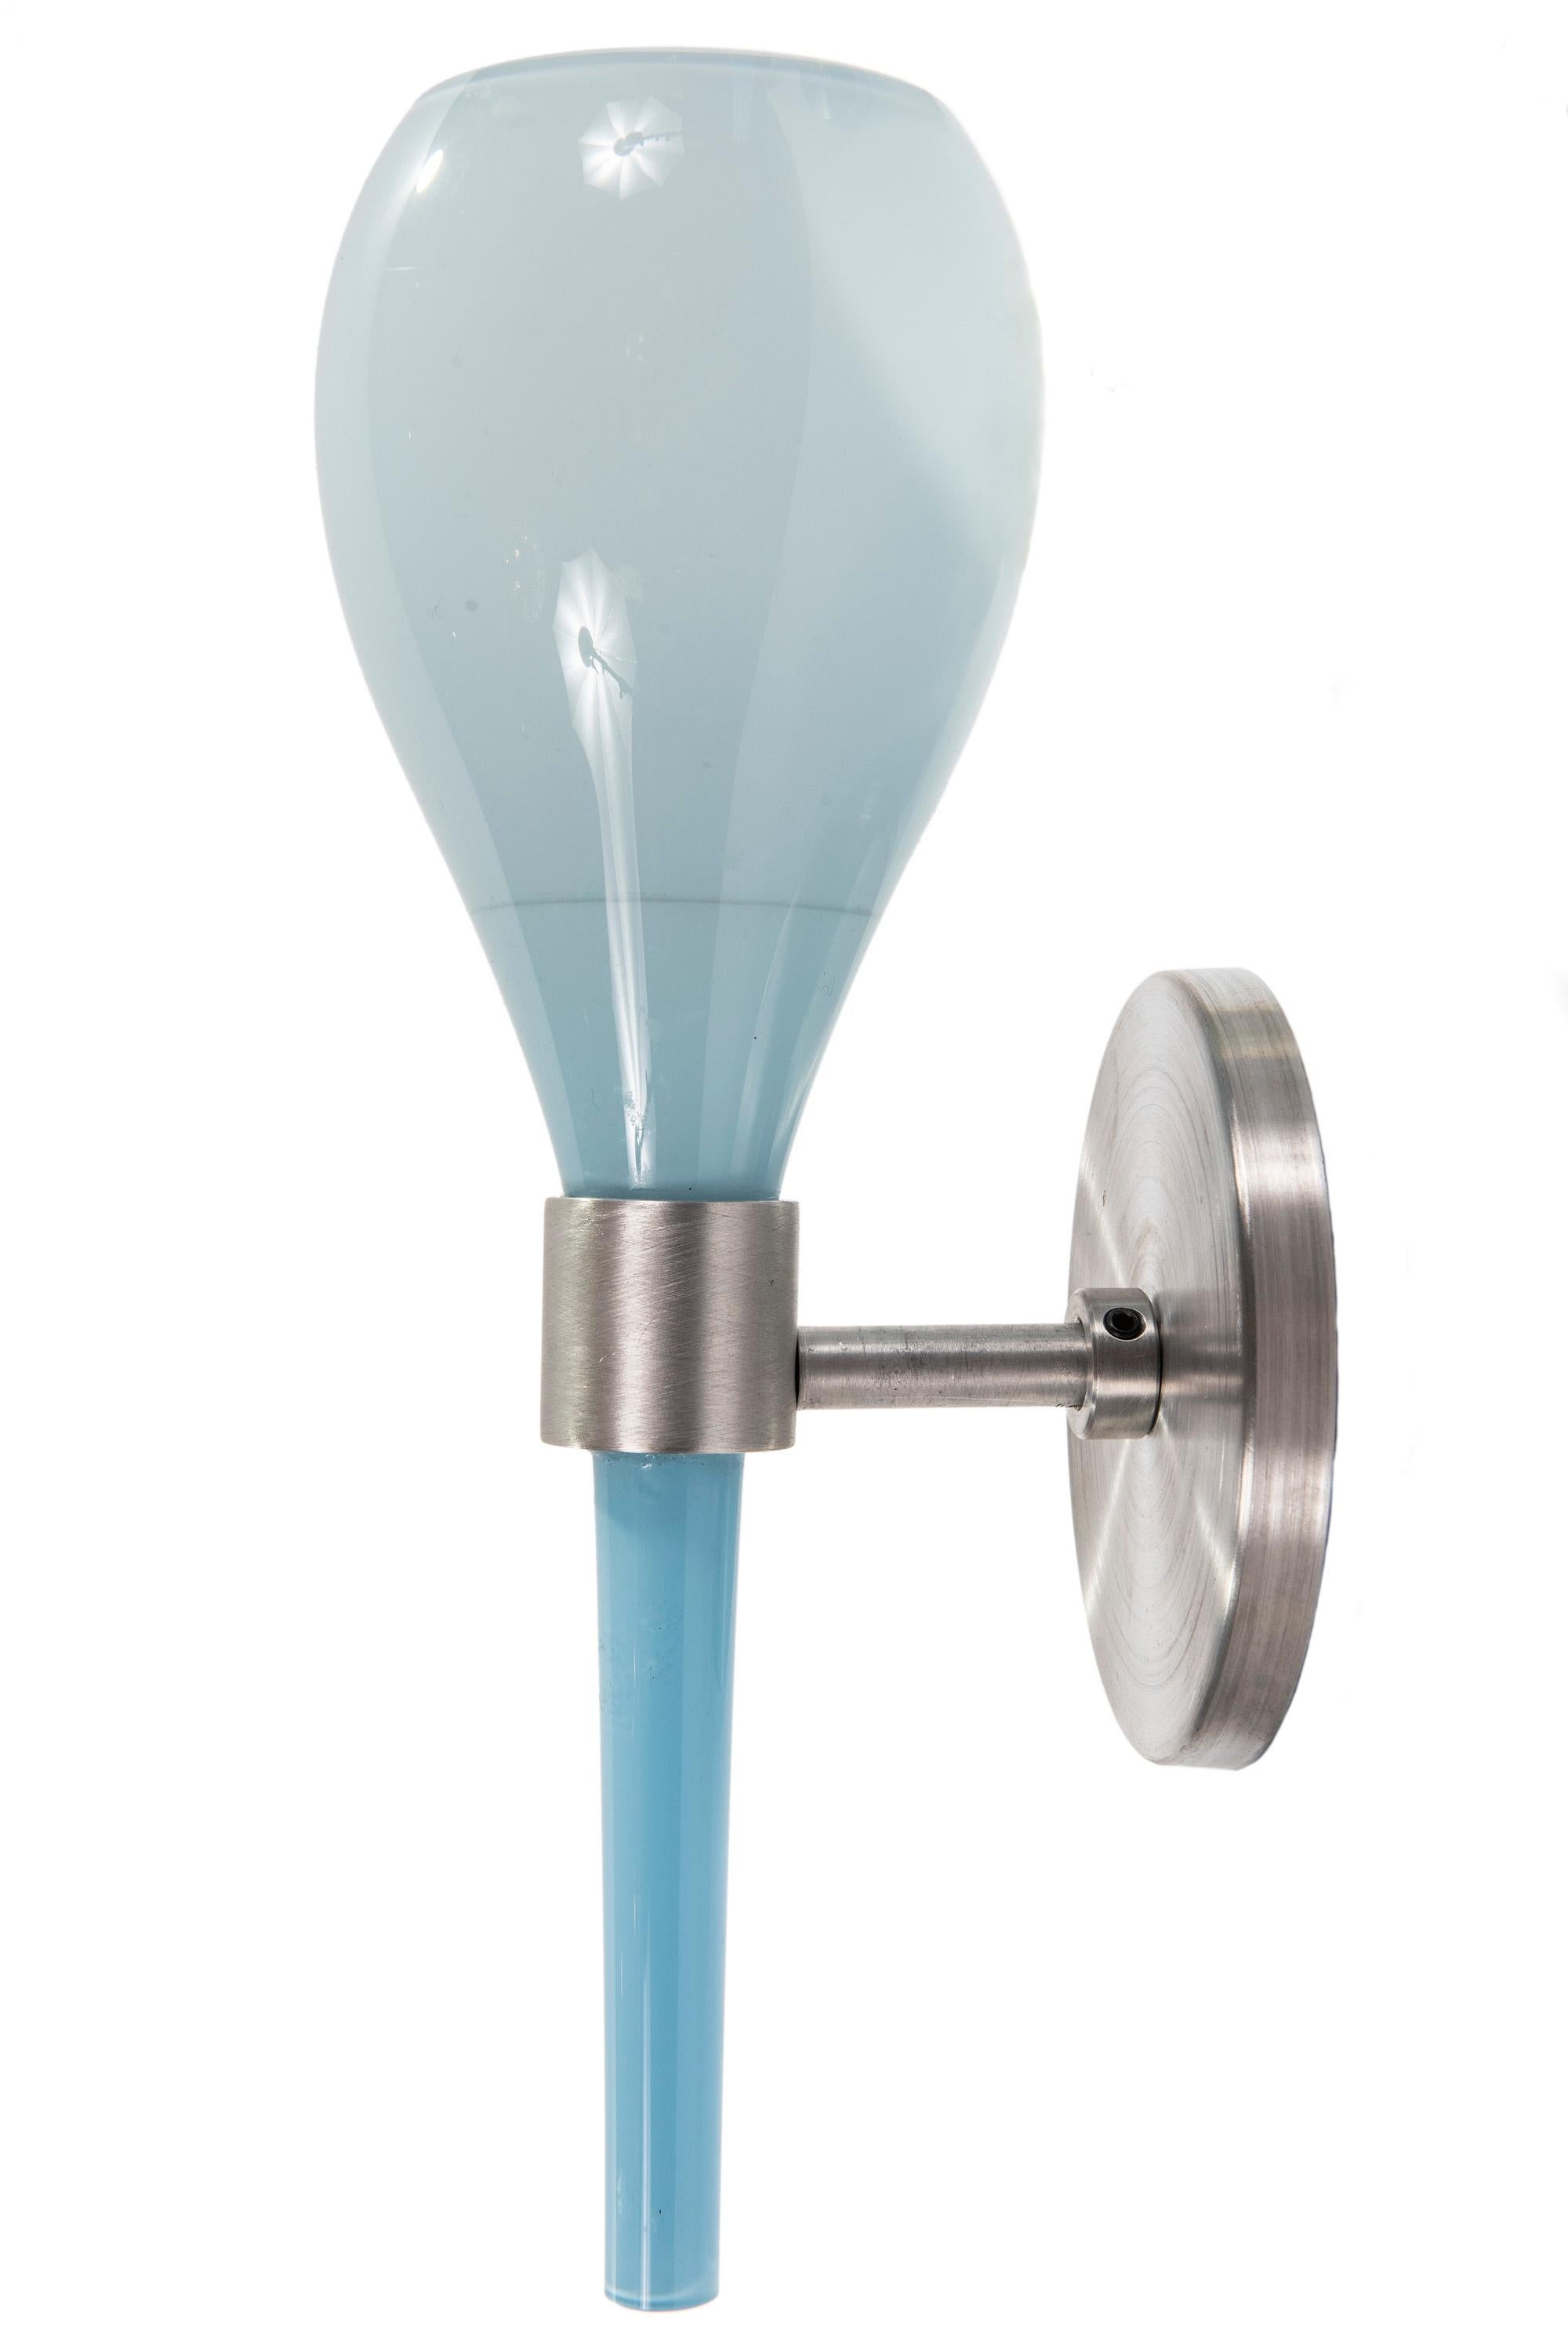 American Pair of Pale Blue Wall Sconces by J. Good Design, NYC